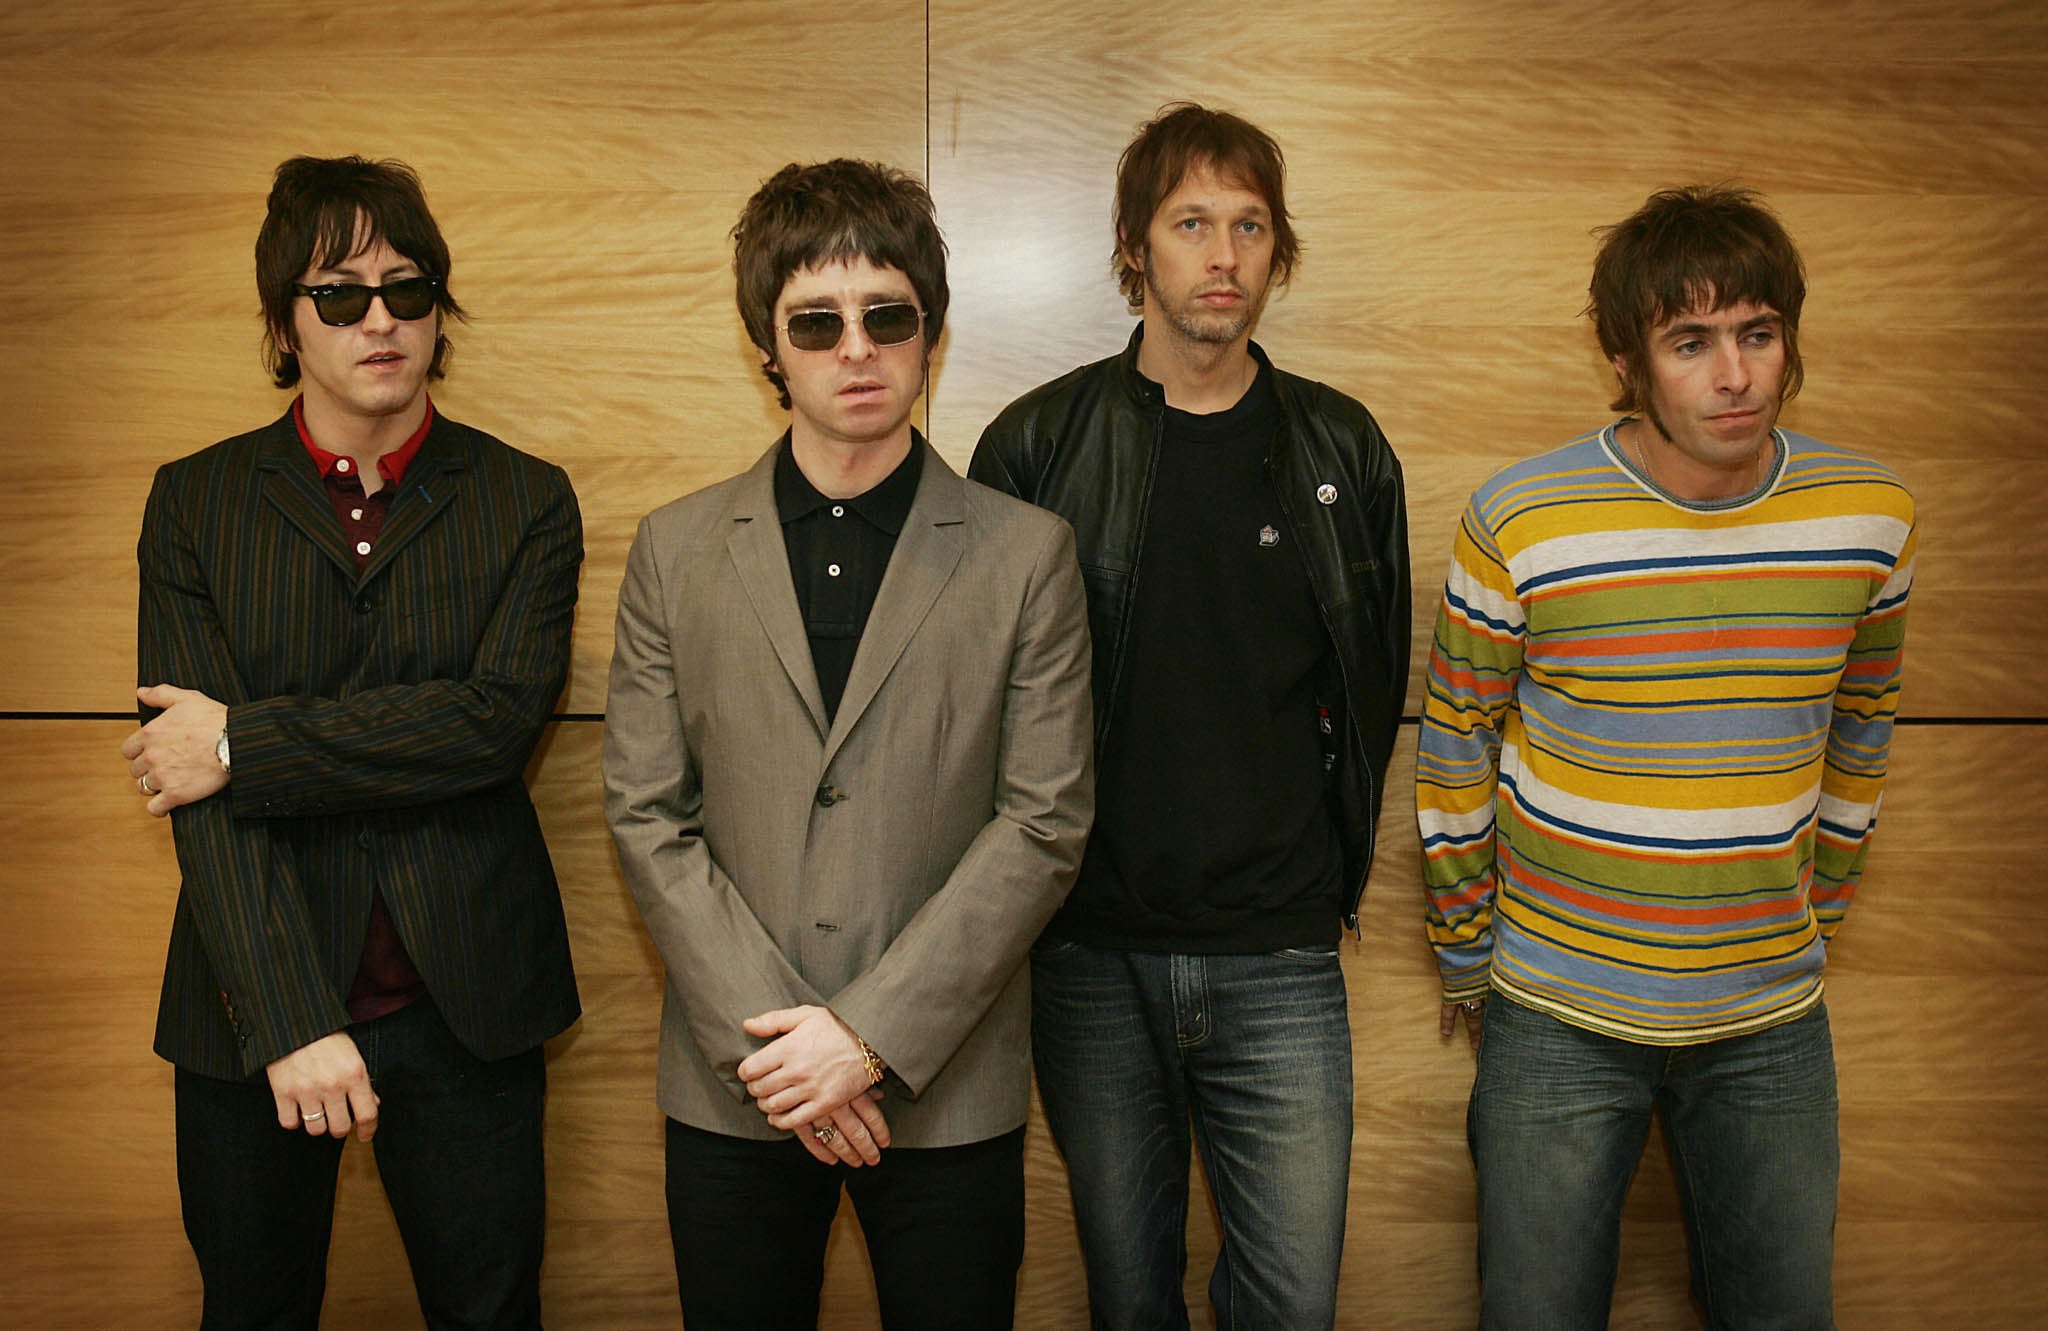 Gem, Noel Gallagher, Andy Bell and Liam Gallagher hold a photocall in Hong Kong on February 25, 2006